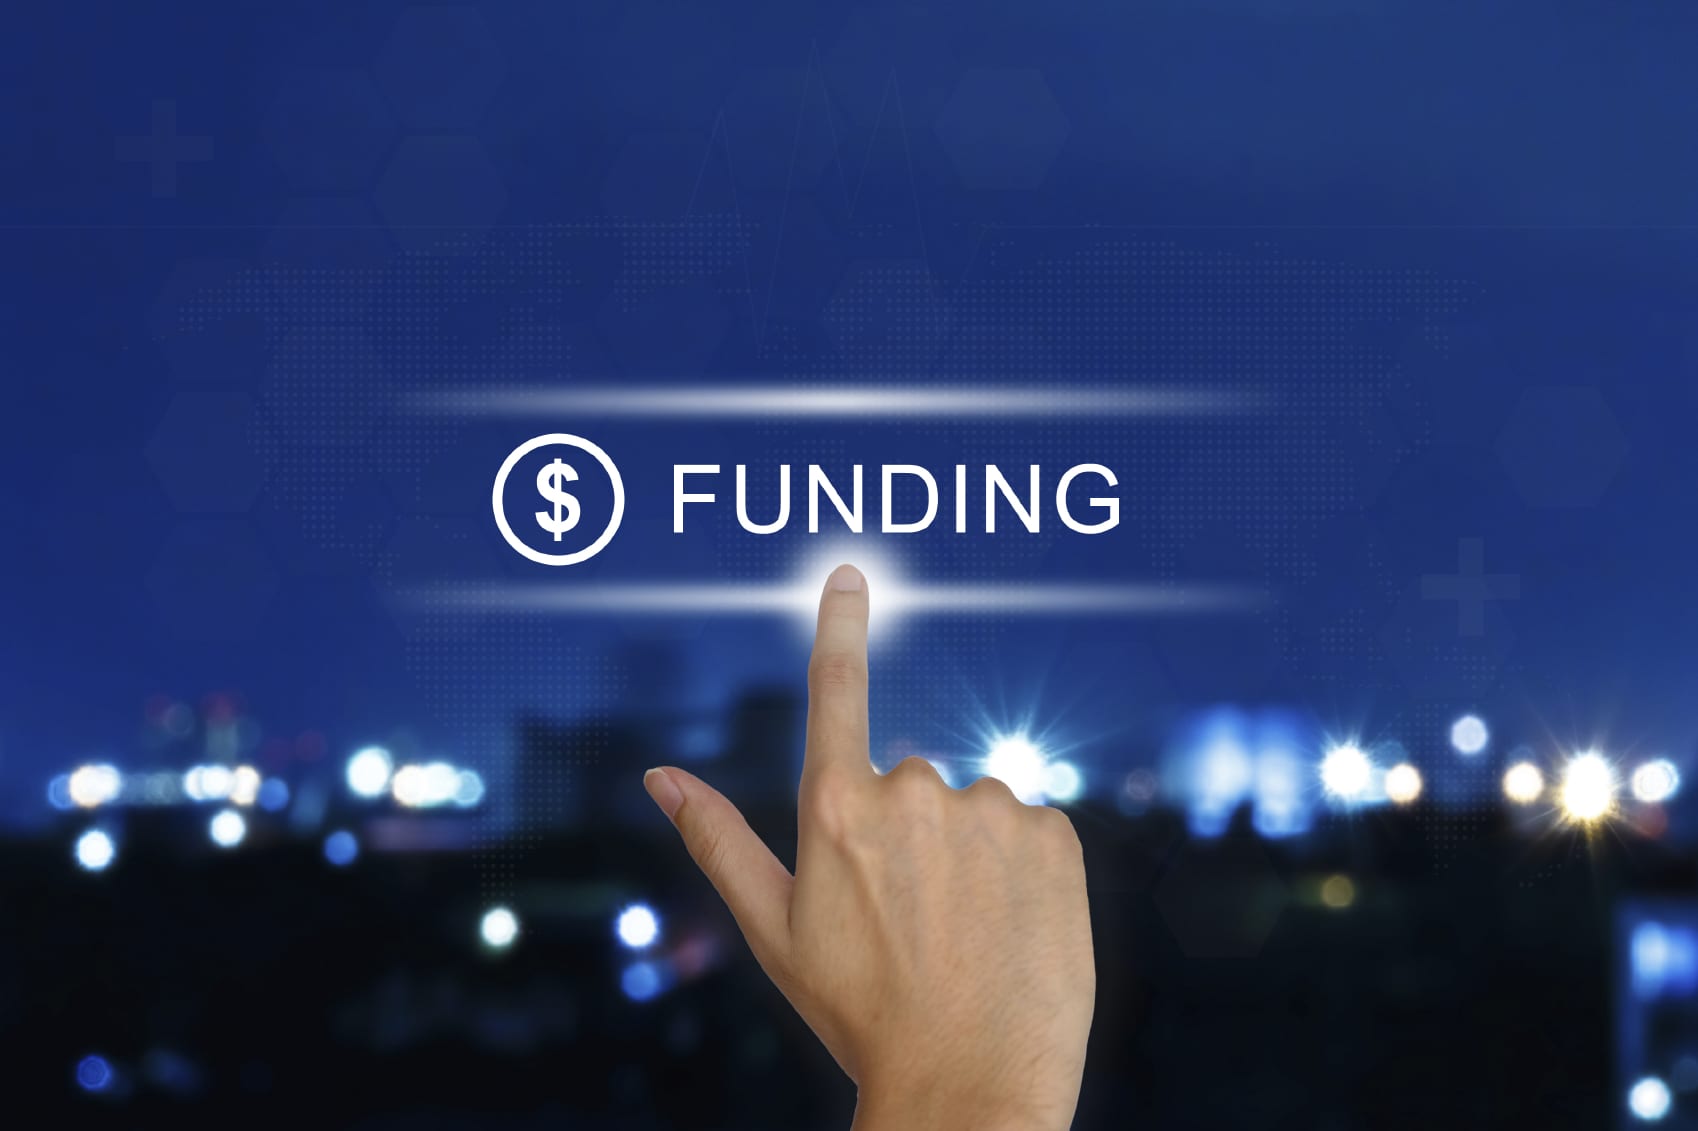 5 Realistic Ways to Find Funding for Your Small Business